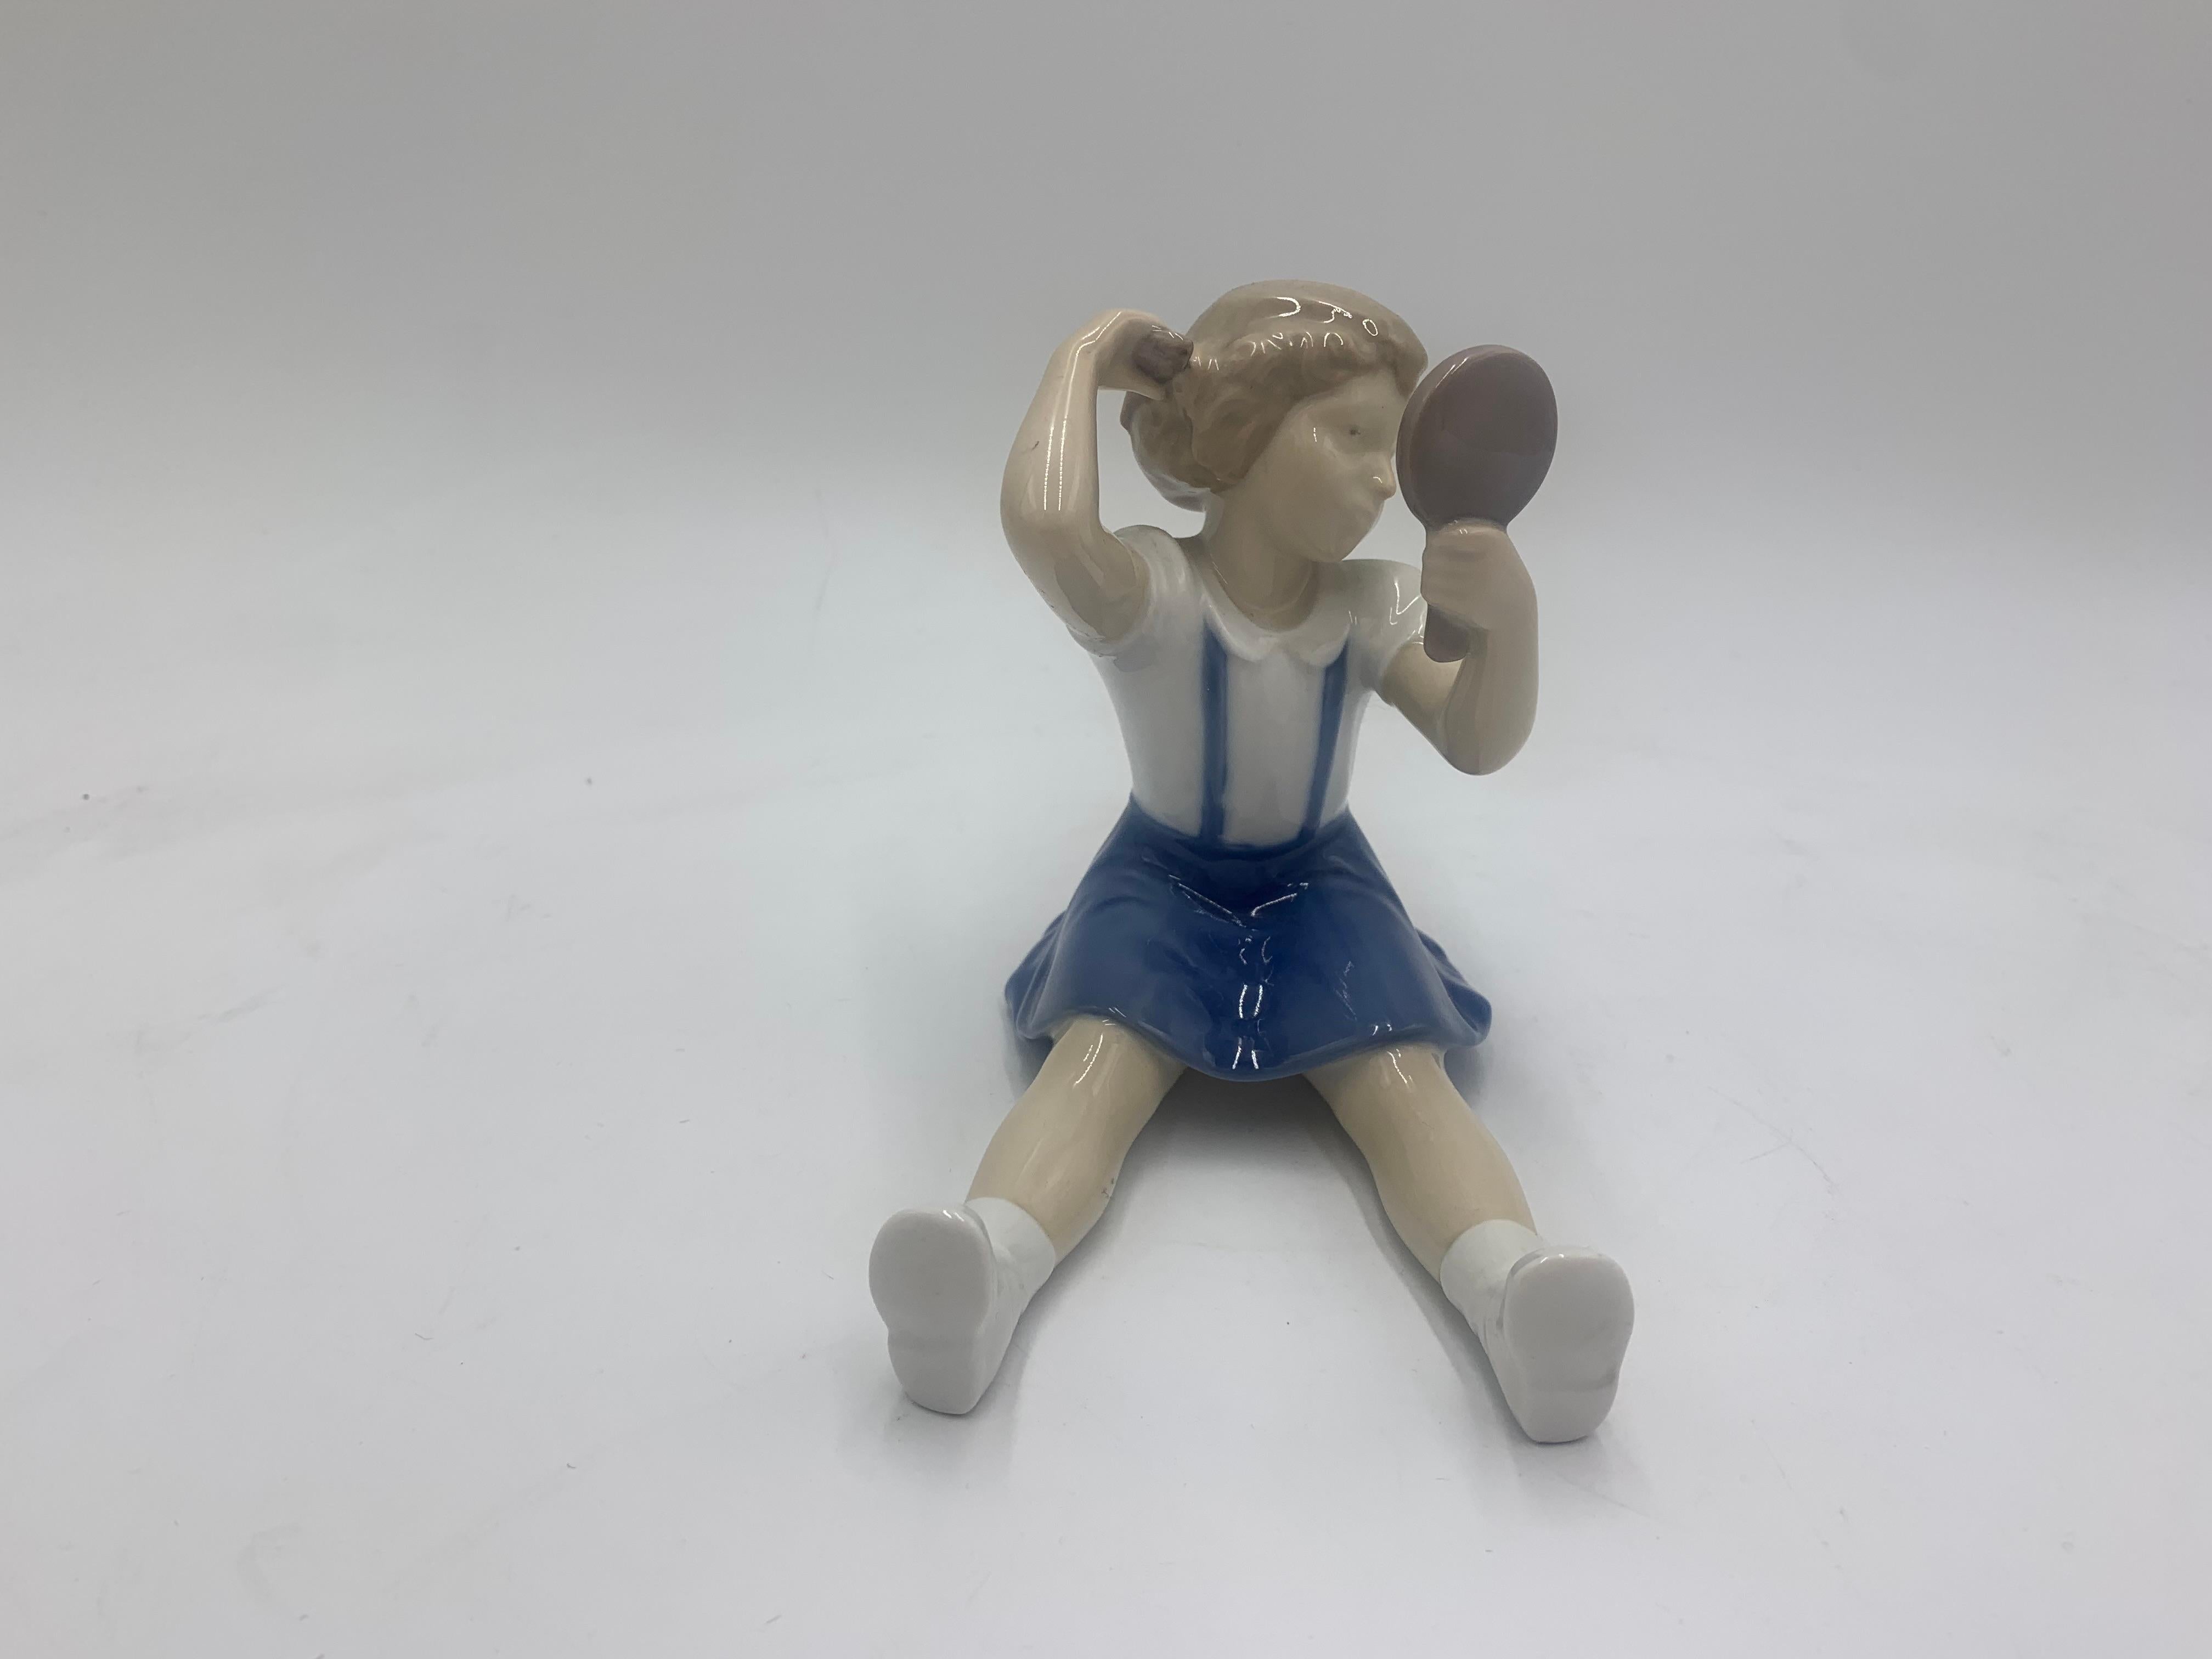 Porcelain Figurine of a Girl Combing, Bing & Grondahl, Denmark, 1950s / 1960s In Good Condition For Sale In Chorzów, PL